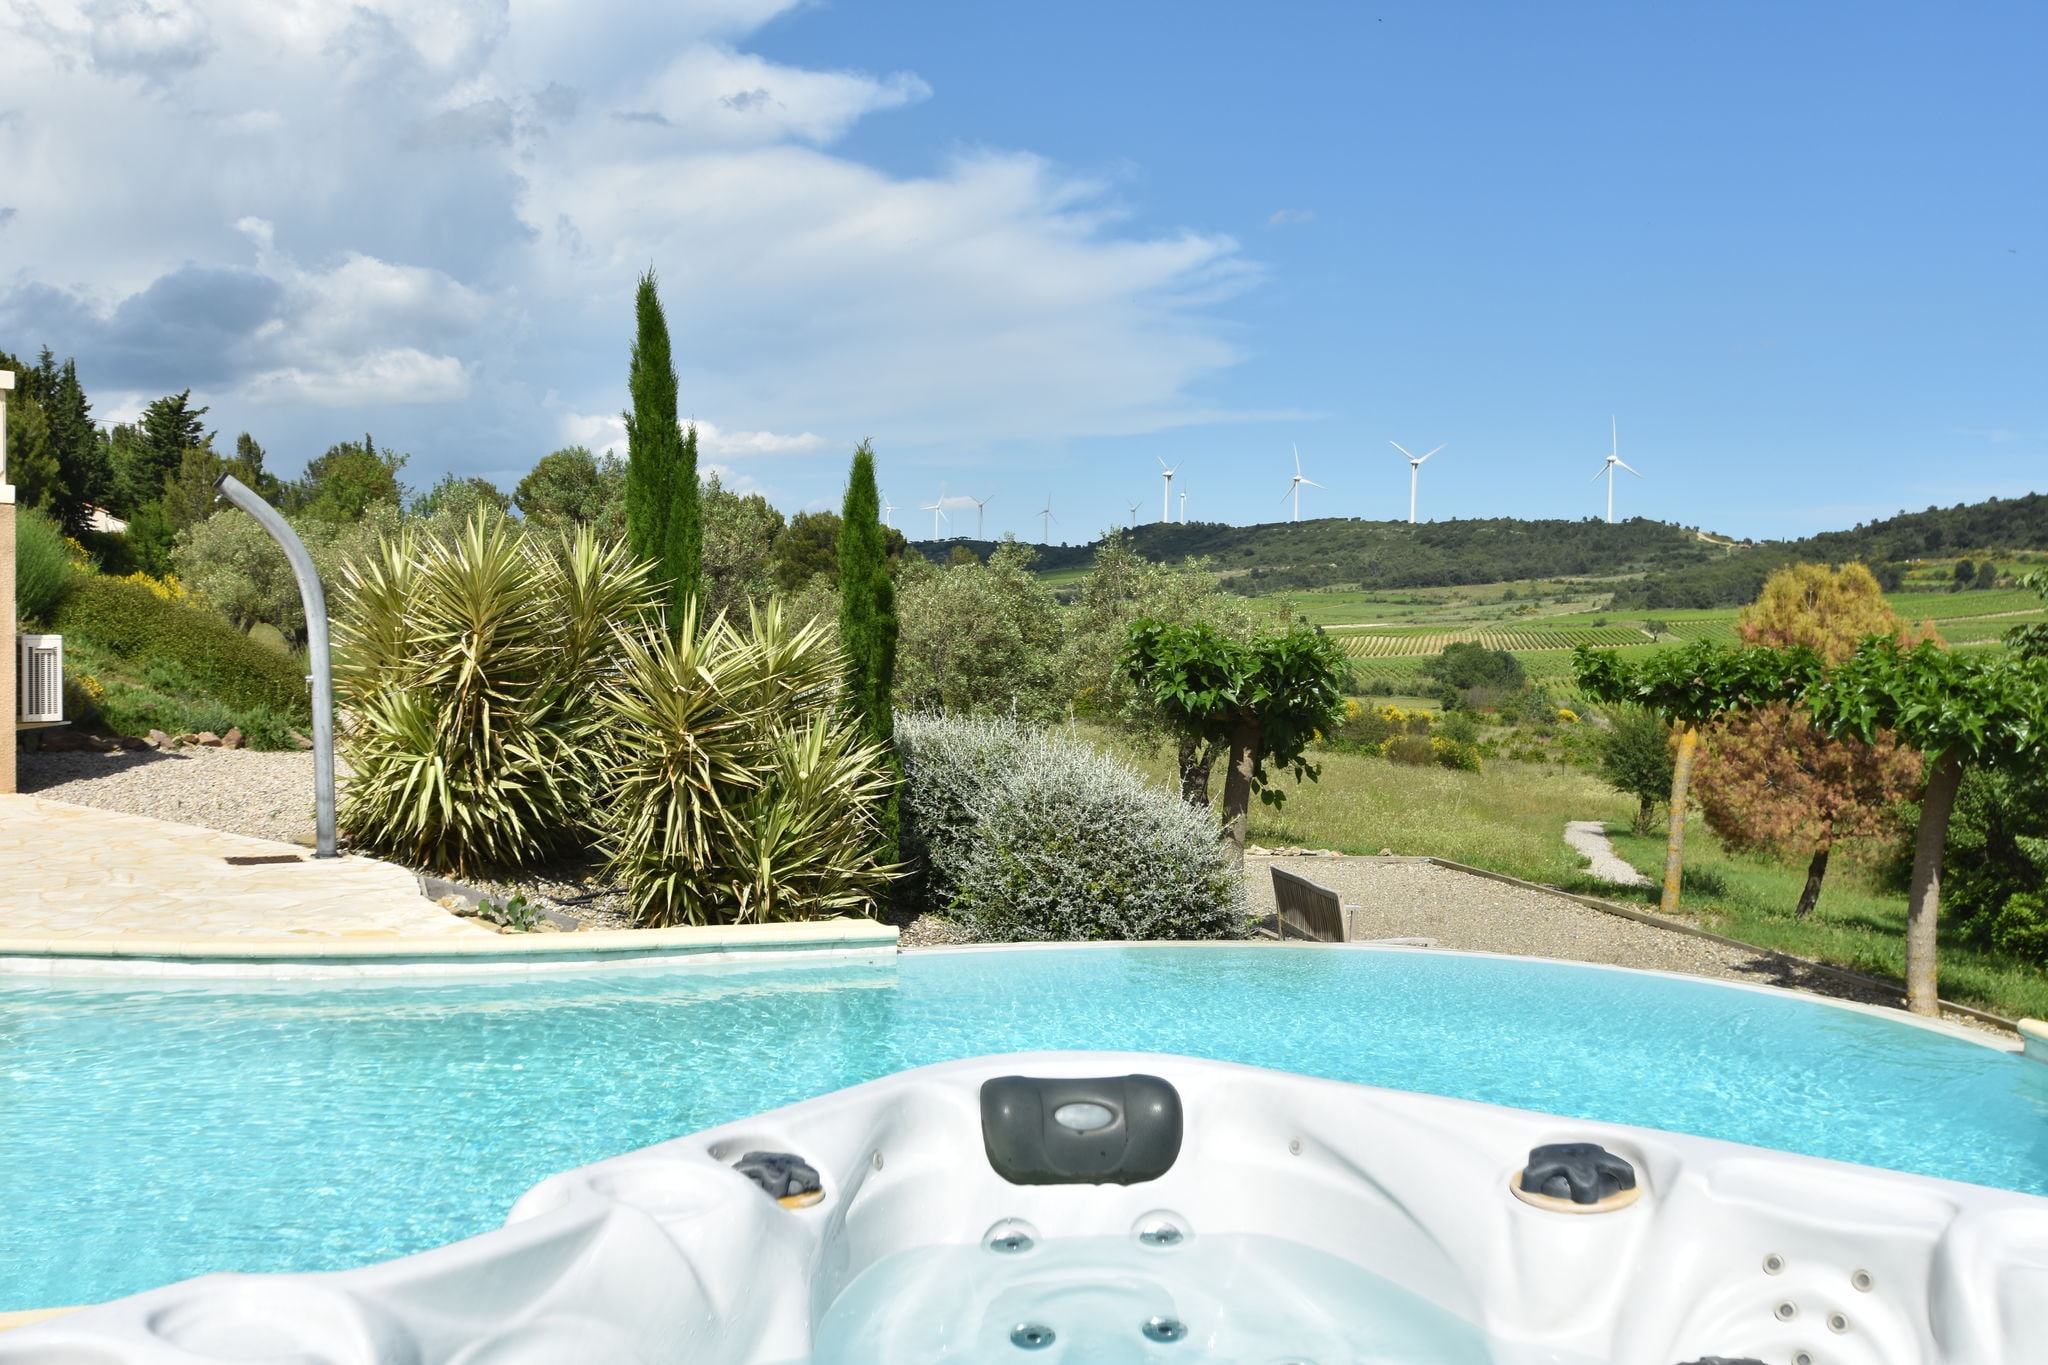 Villa with heated pool, jacuzzi, sports field and stunning views